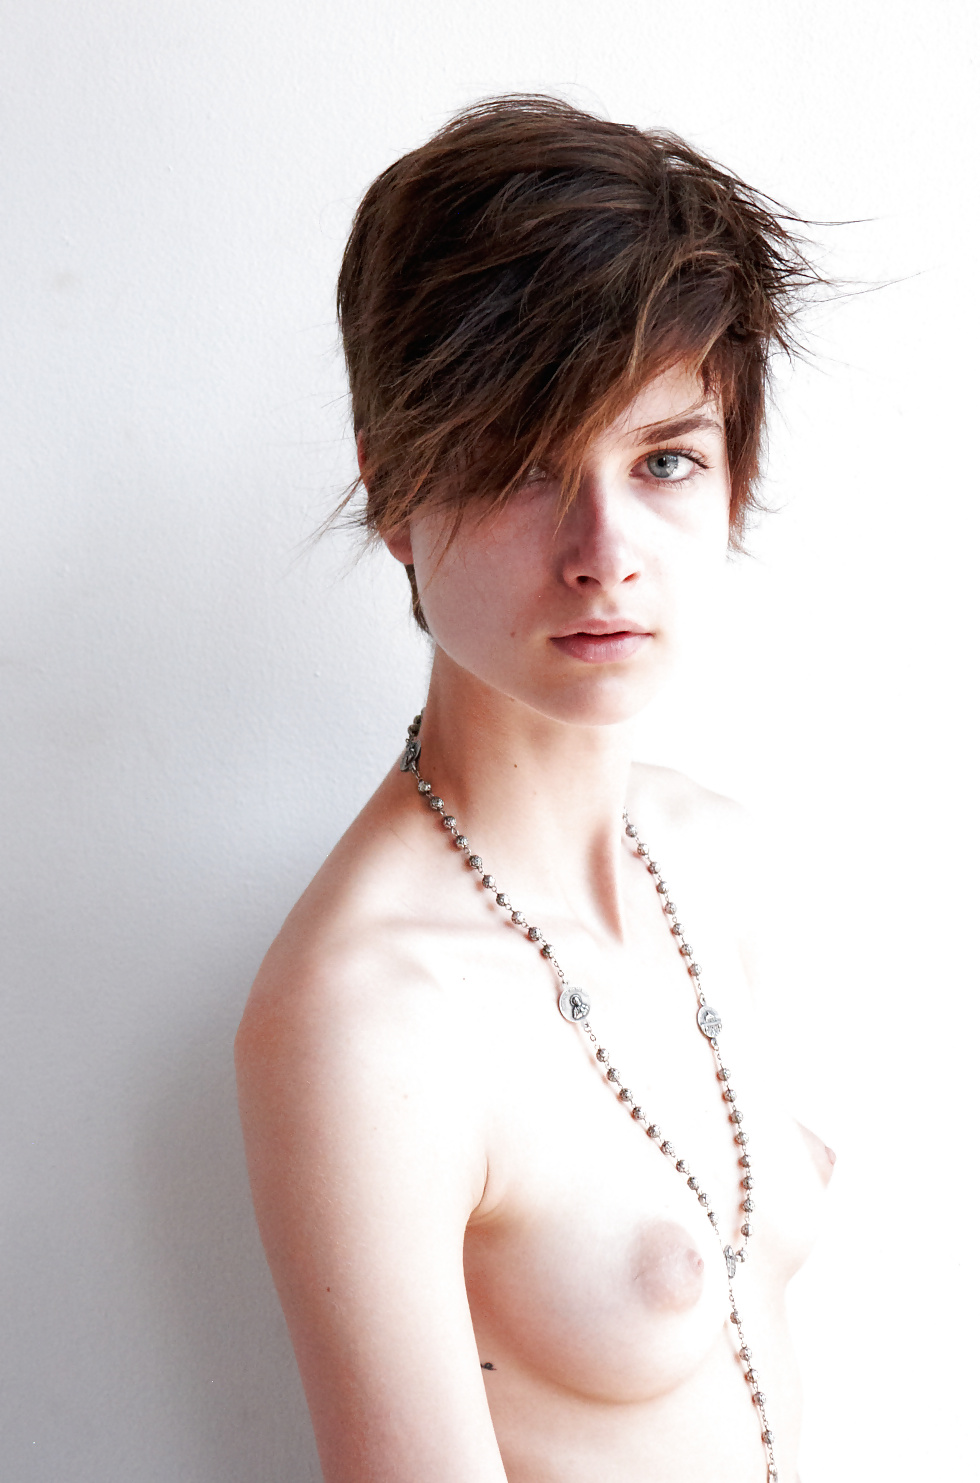 Girls with short hair #31741639